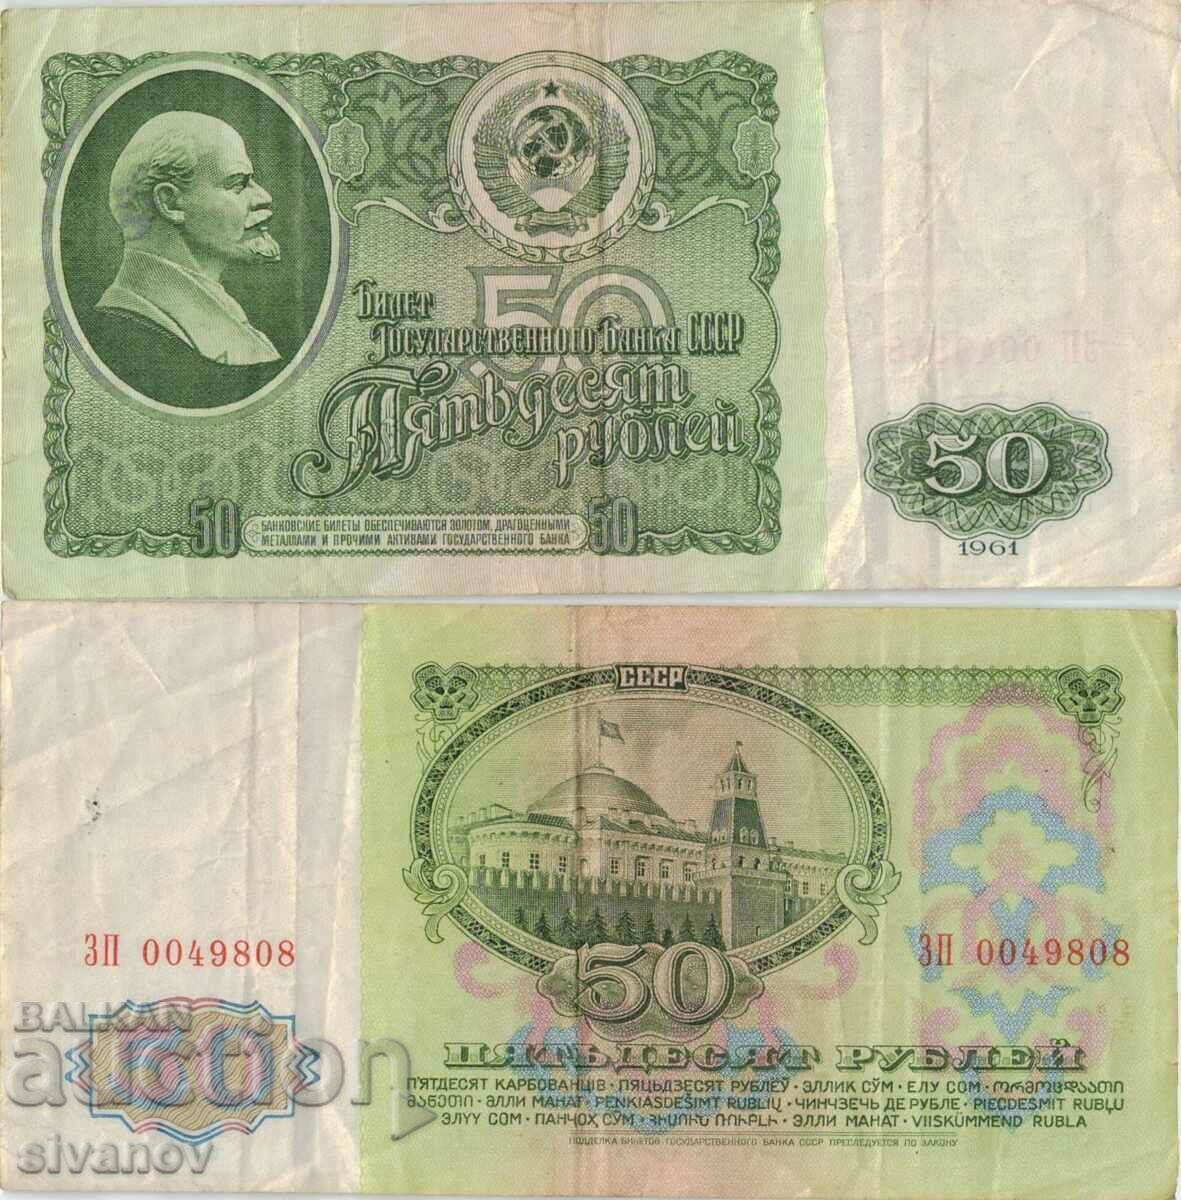 Soviet Union Russia USSR 50 rubles 1961 banknote #5349